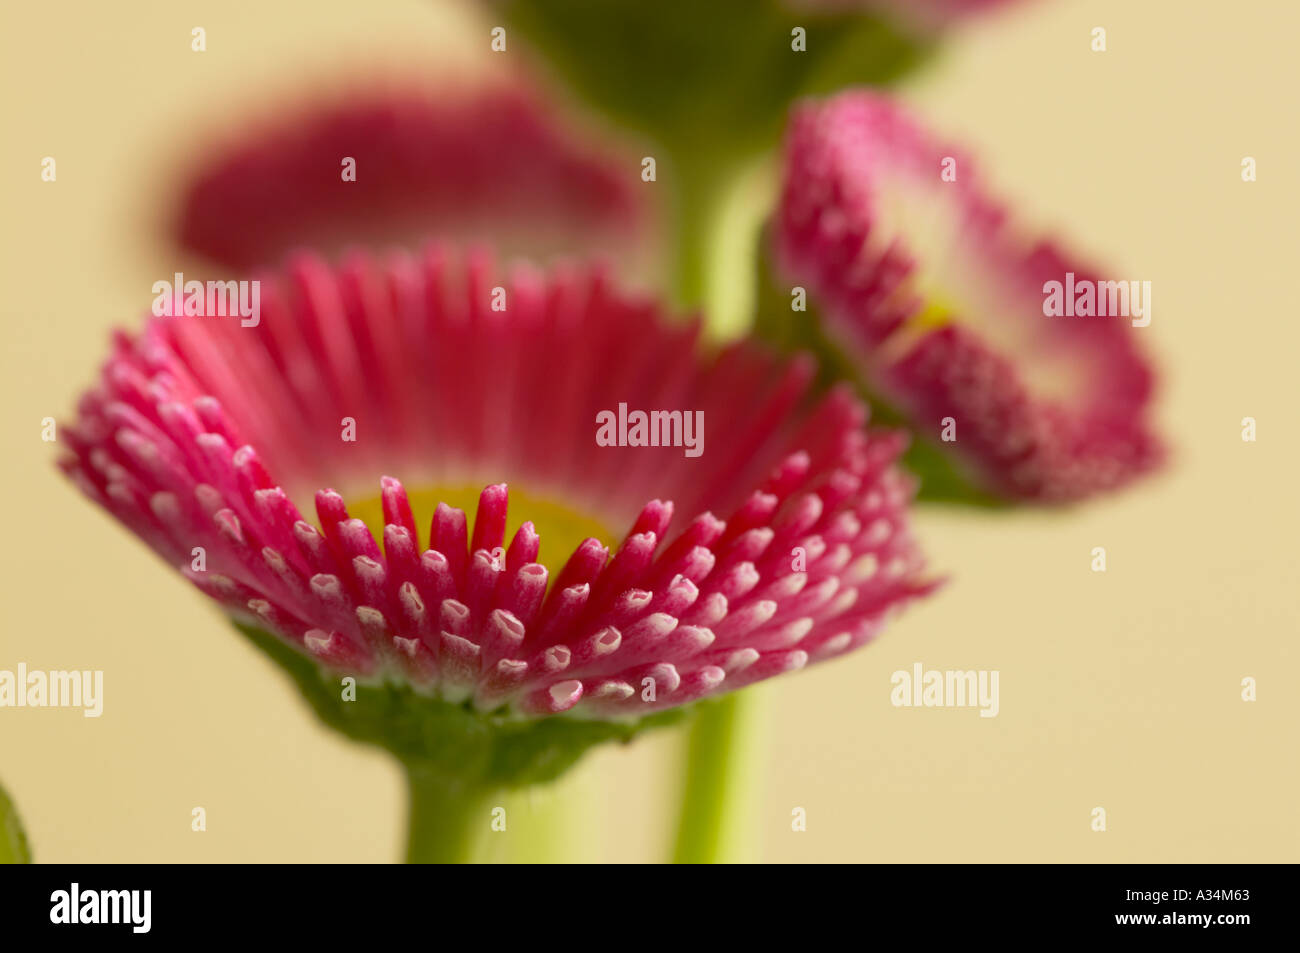 England, UK. Close up view of red Bellis perennis flowers Stock Photo